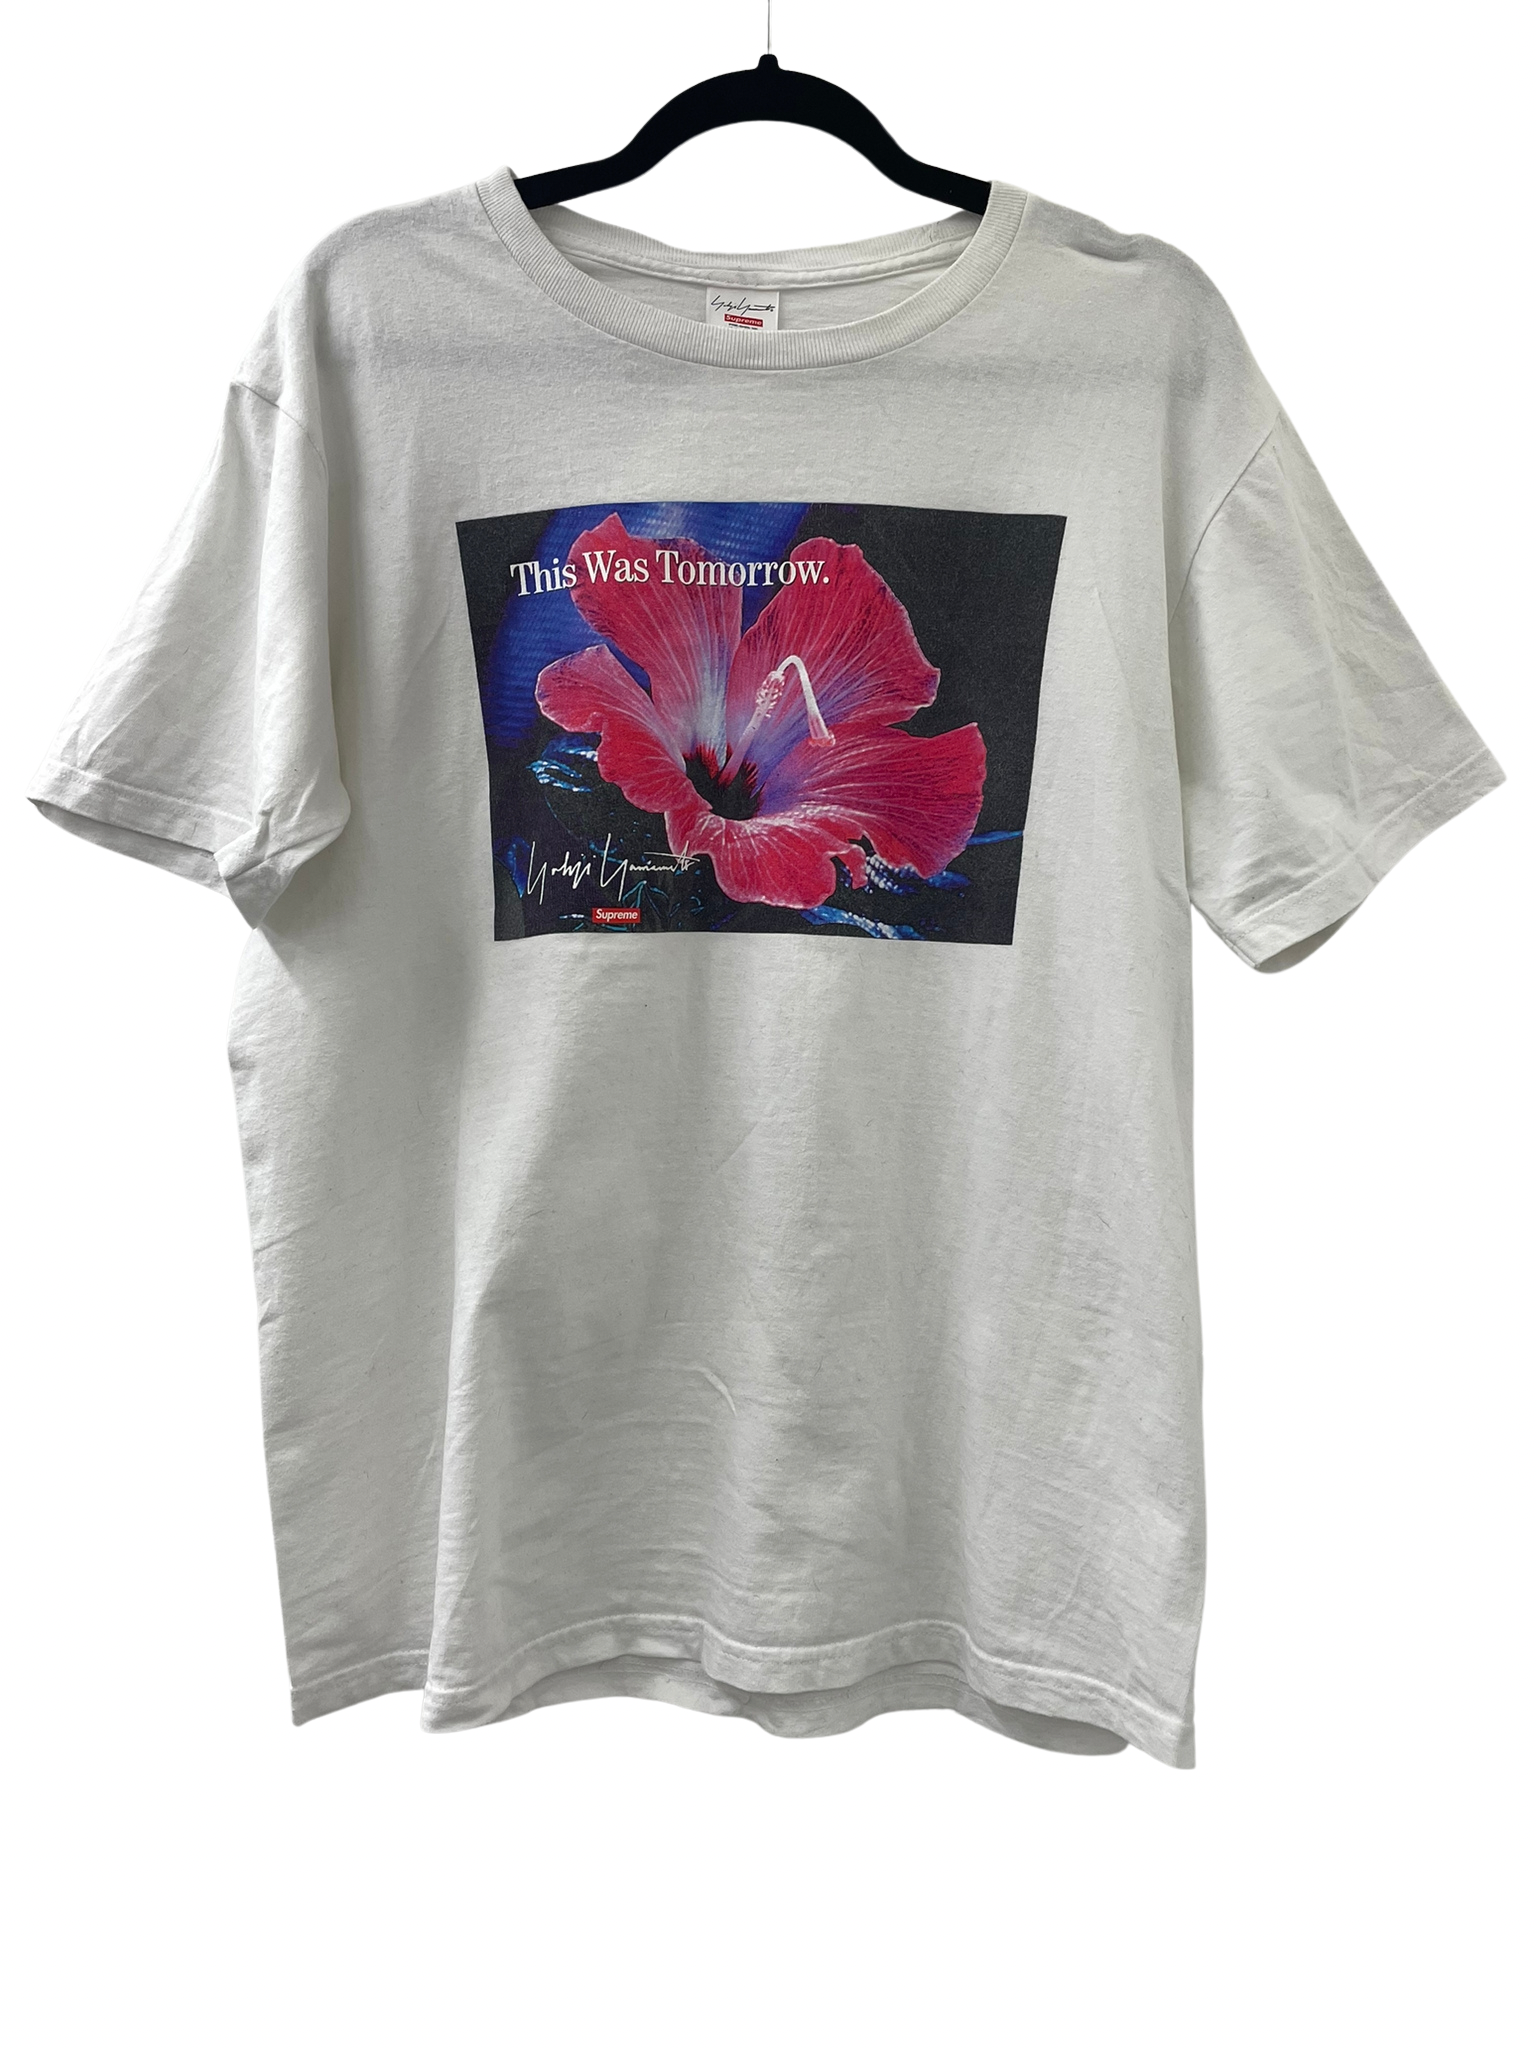 TIE-DYE LOVED WHITE PRE (YOJHI MONCLER SWEATER - COLLAB) WAS SHIRT T - THIS TOMORROW SUPREME -